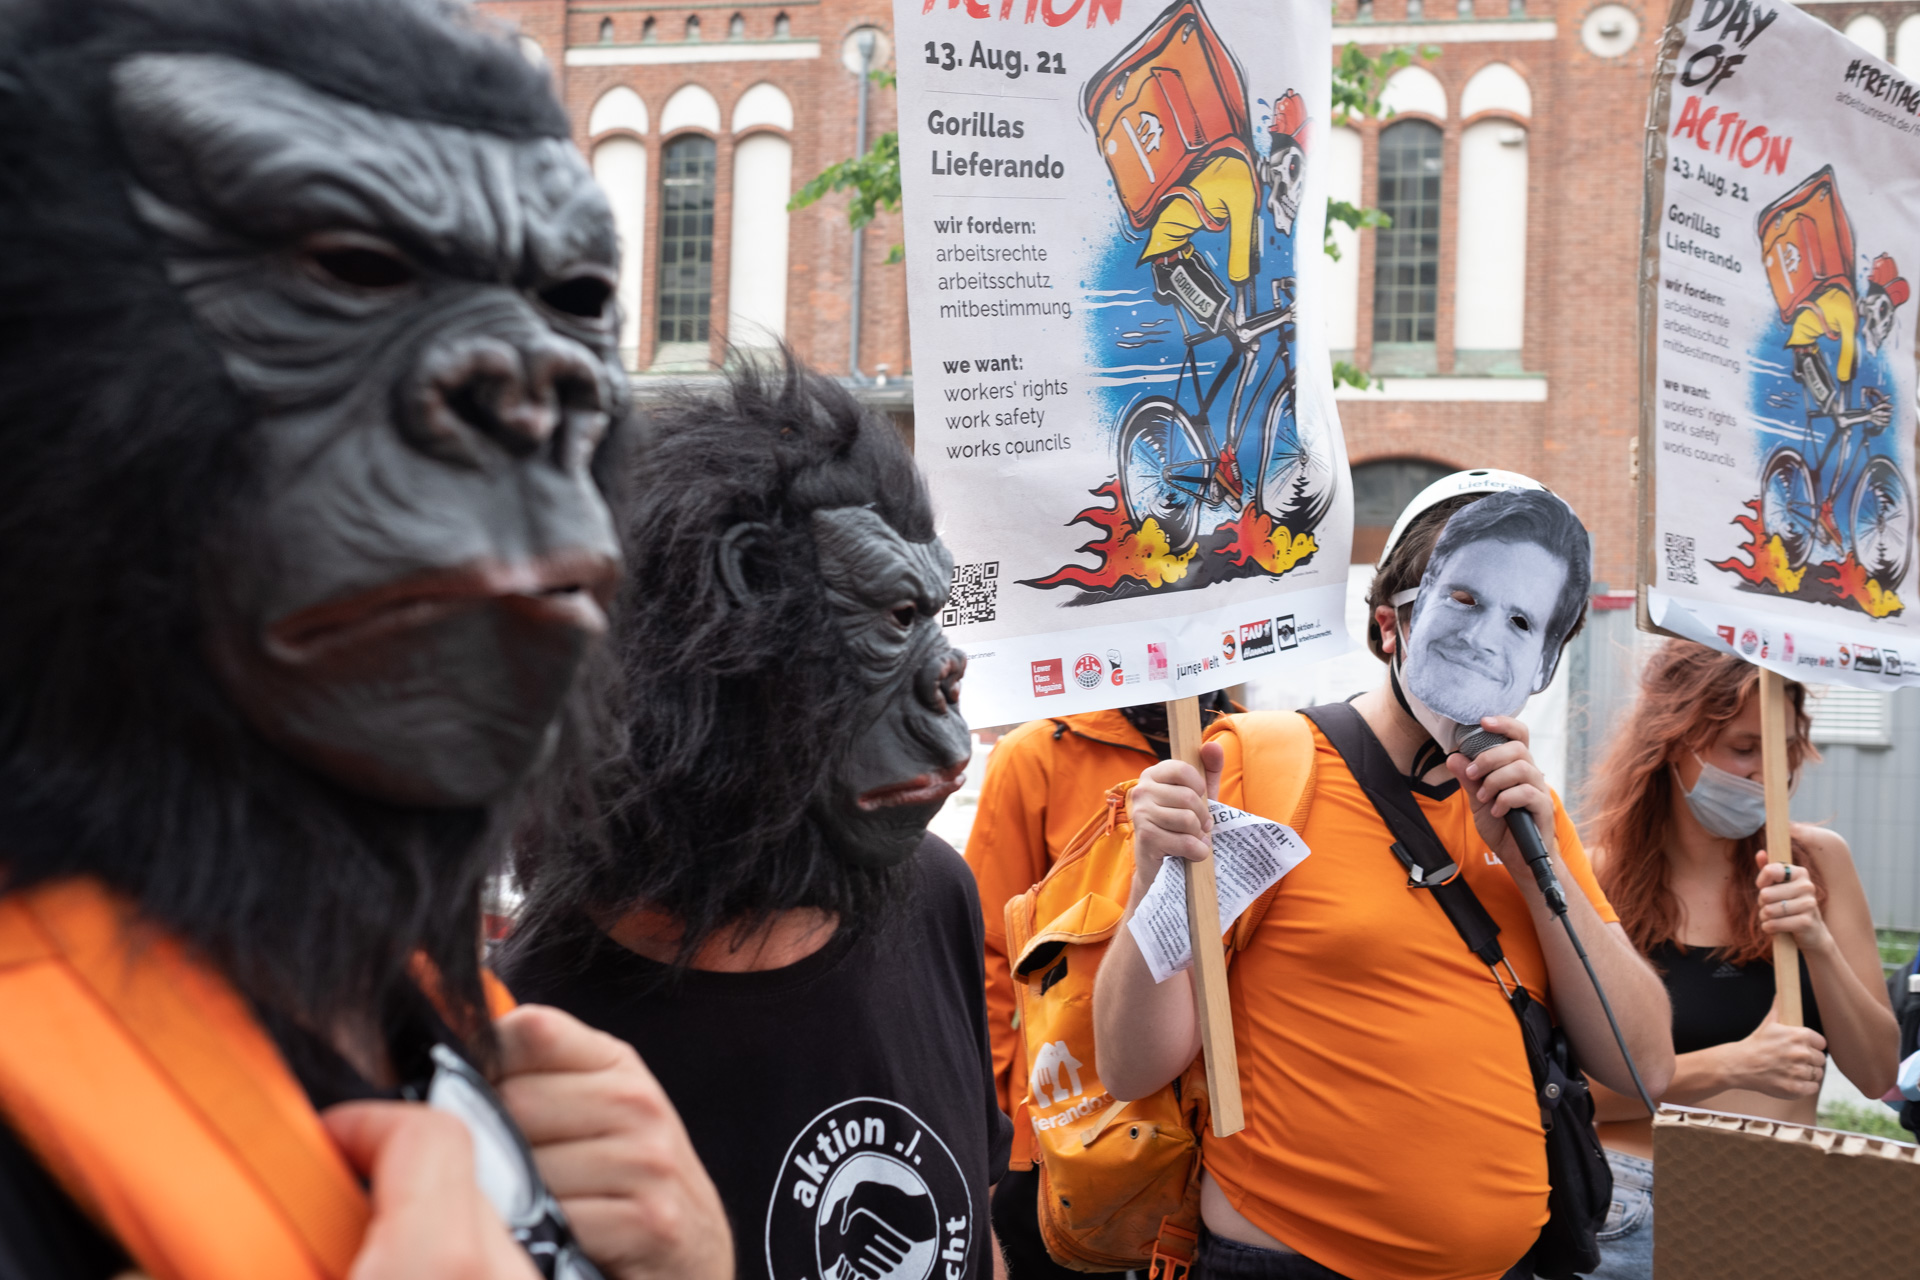 Gorillas Riders sue for permanent and continued employment